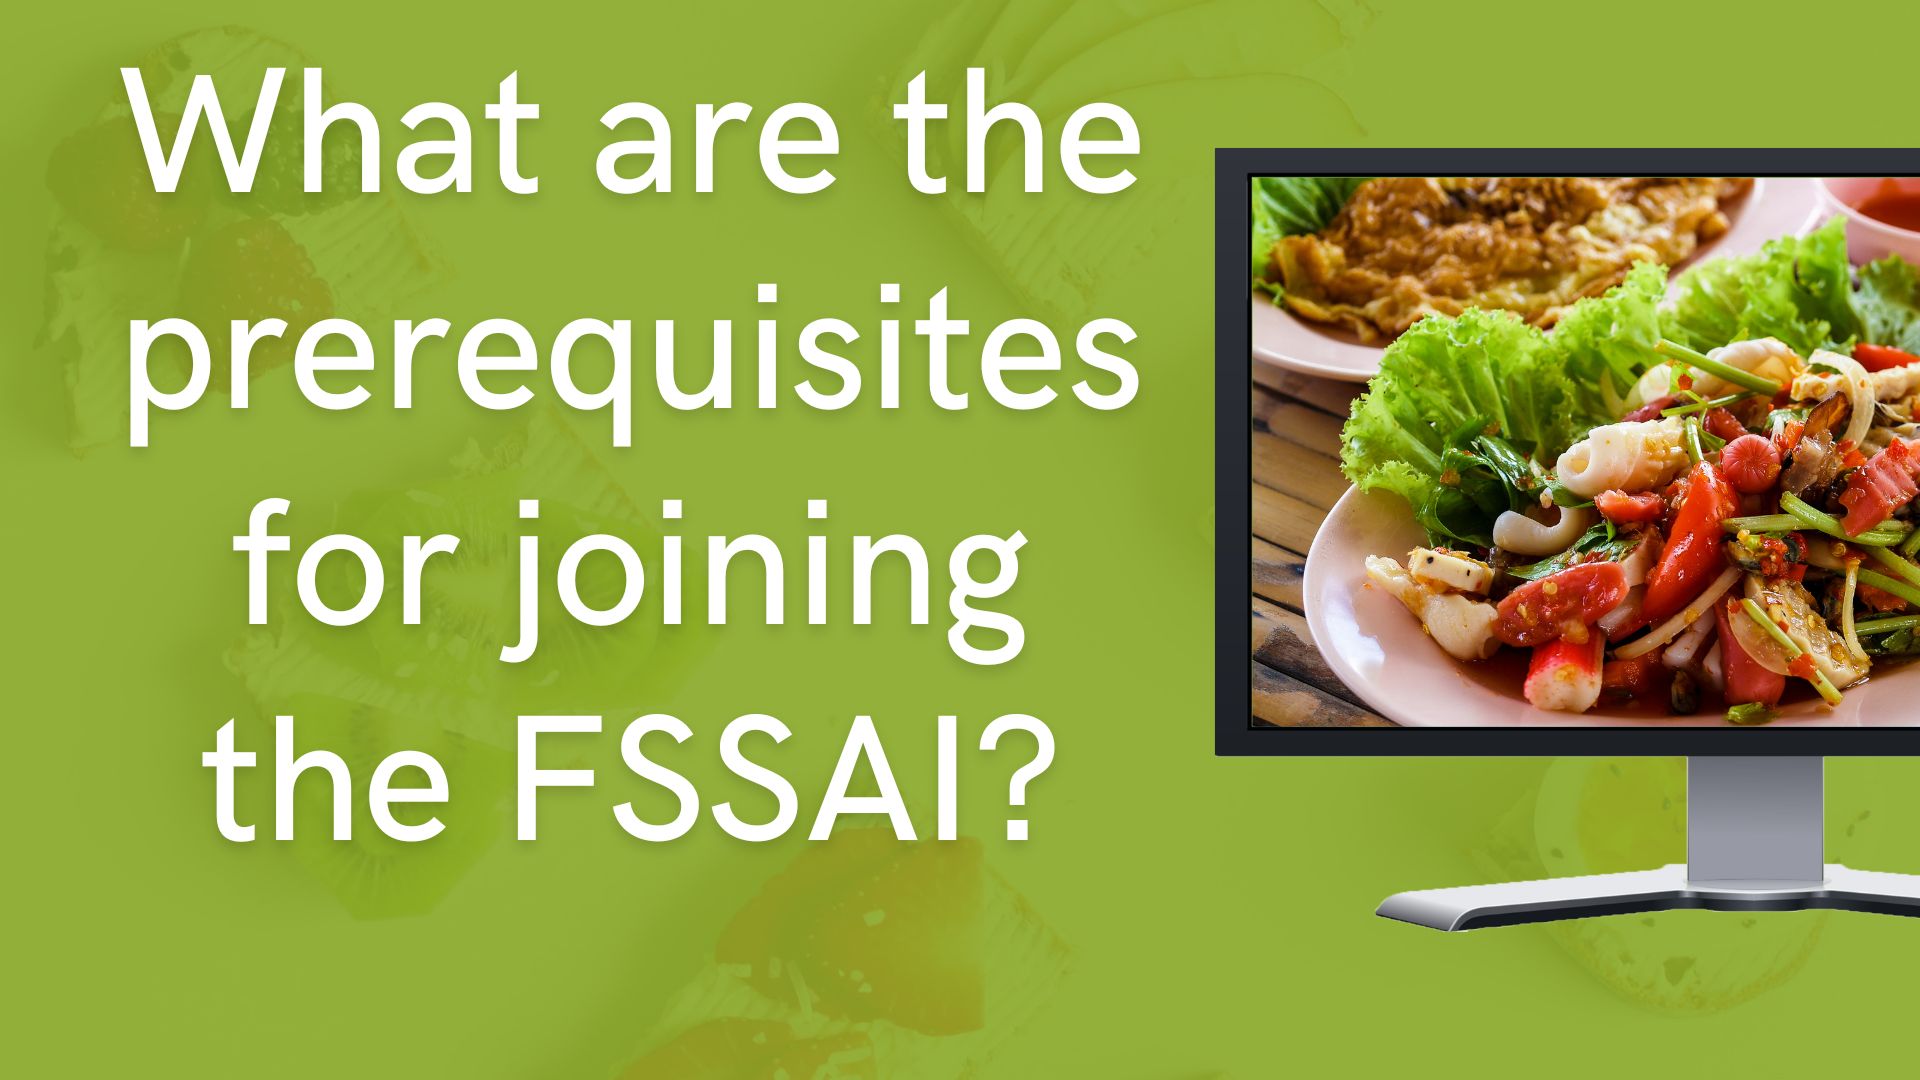 What are the prerequisites for joining the FSSAI?￼